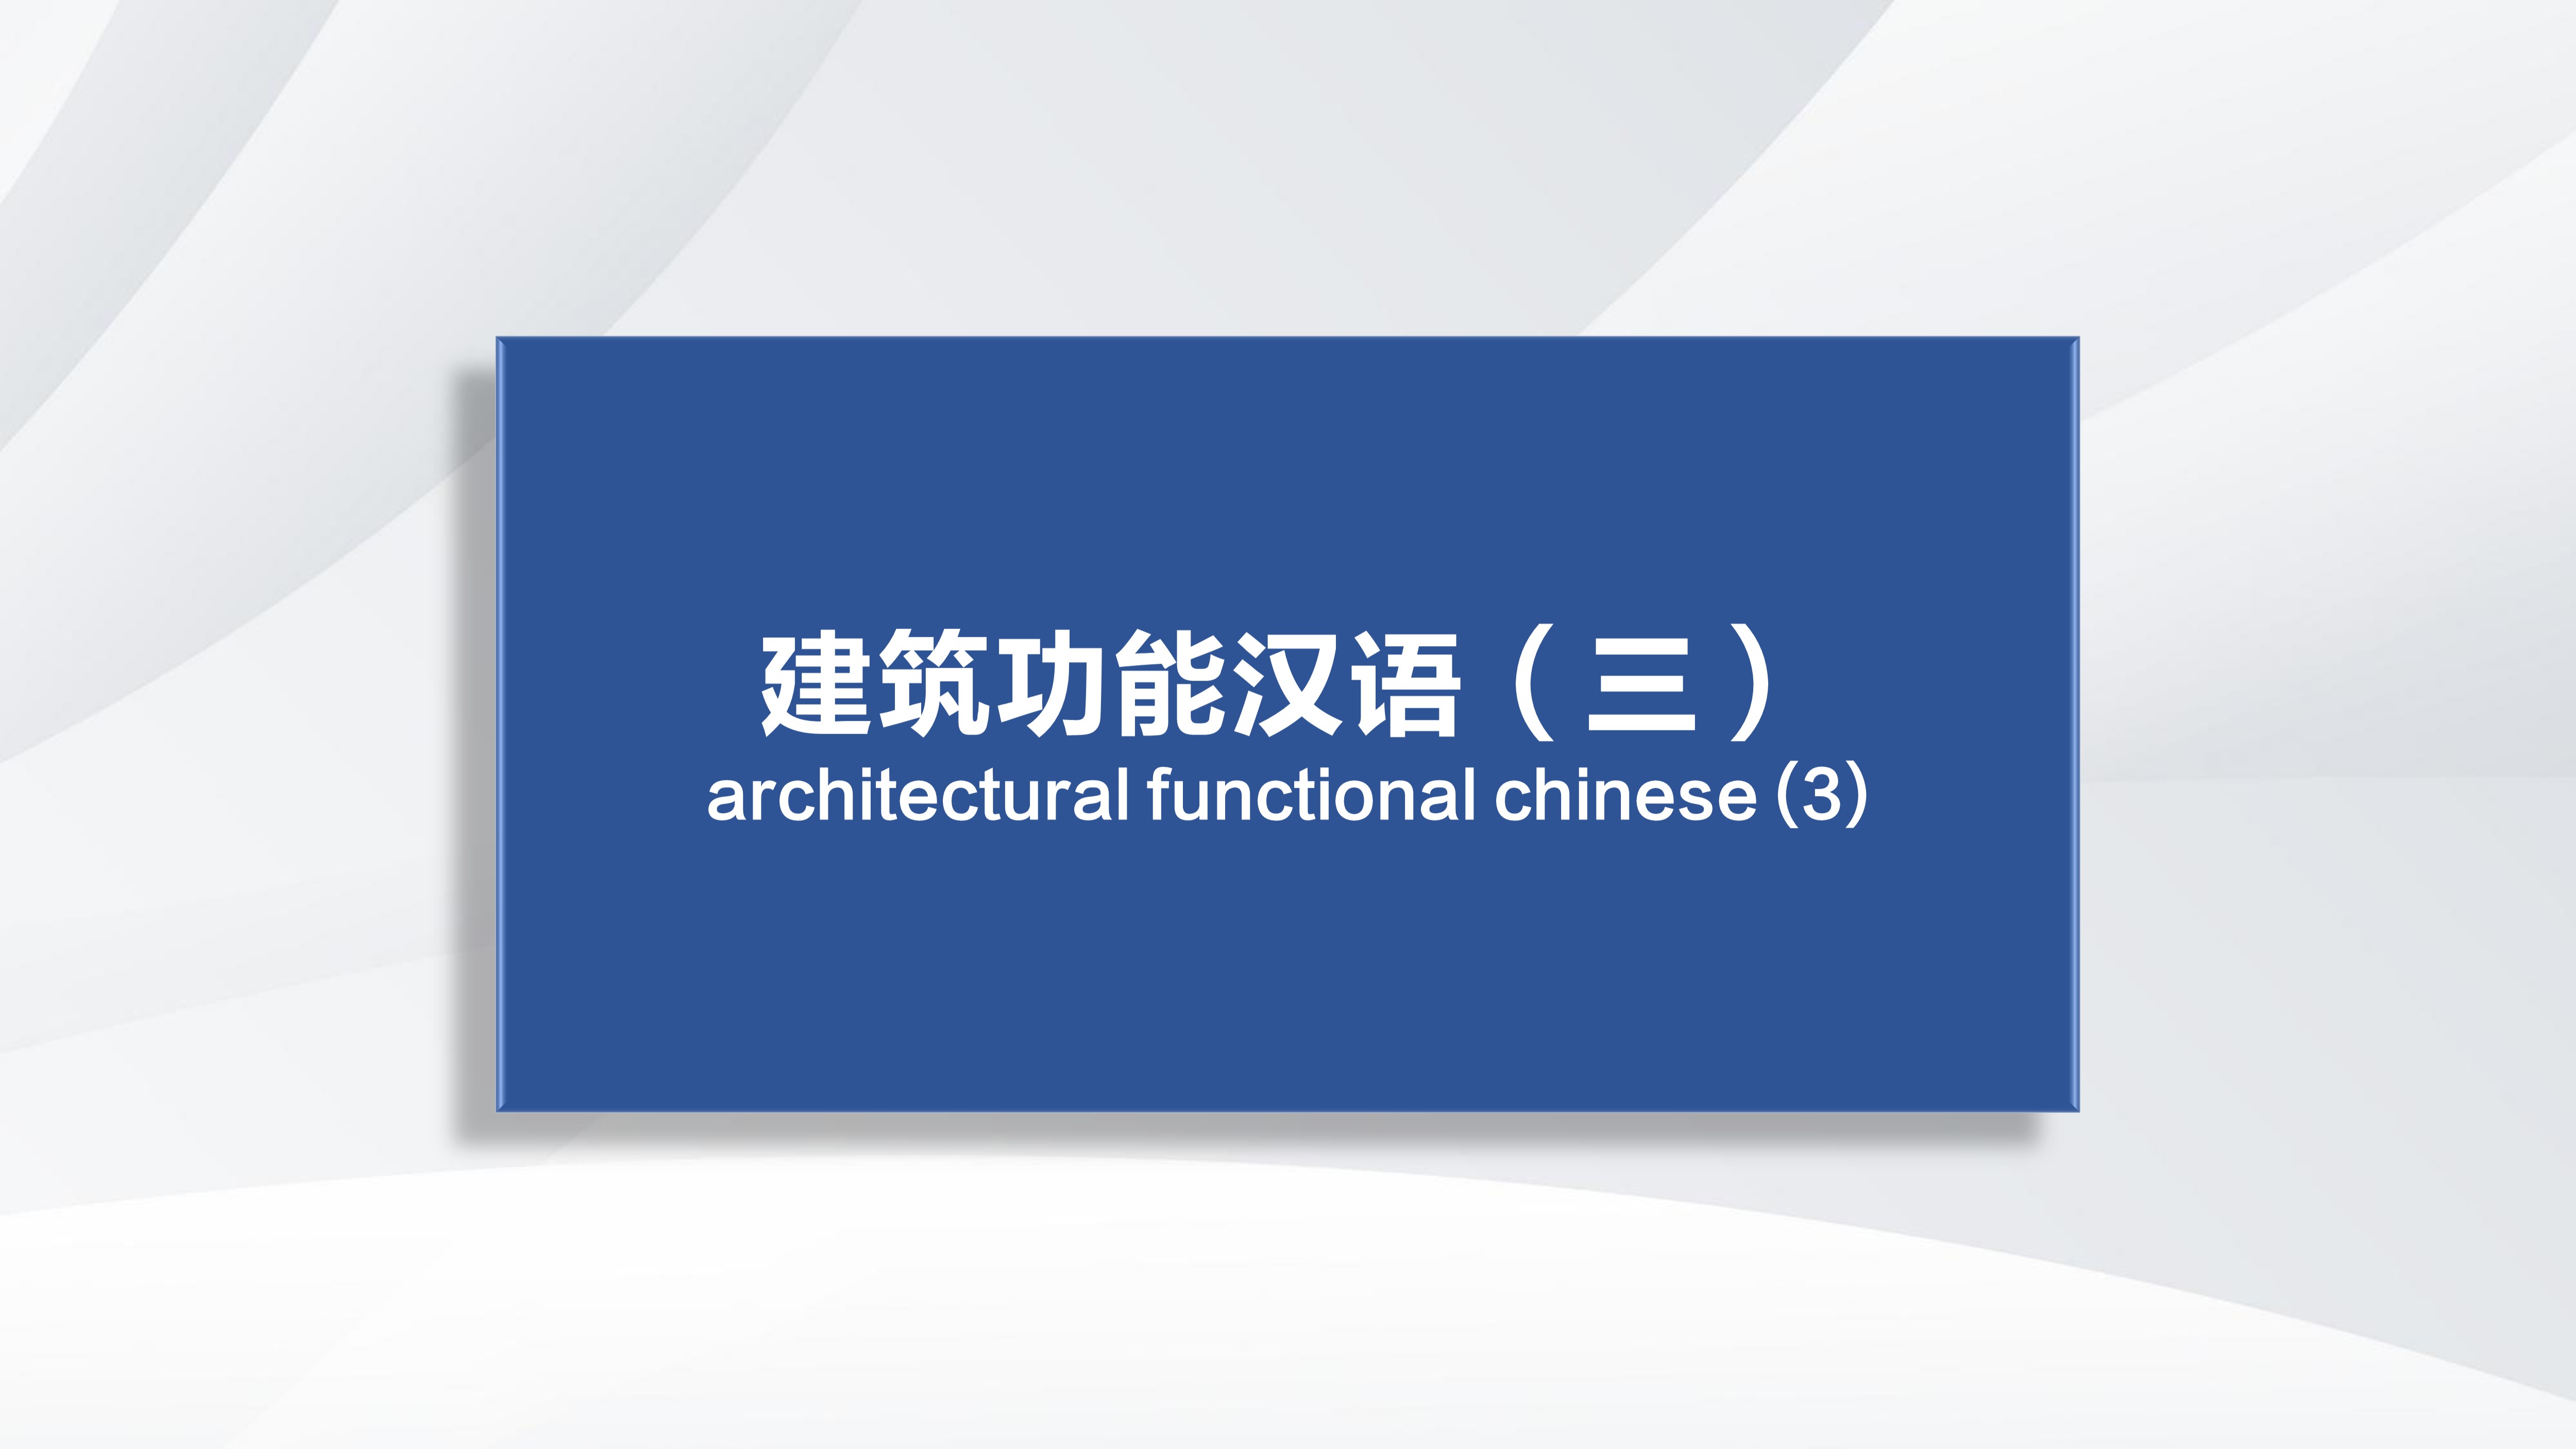 Architectural Functional Chinese (3)